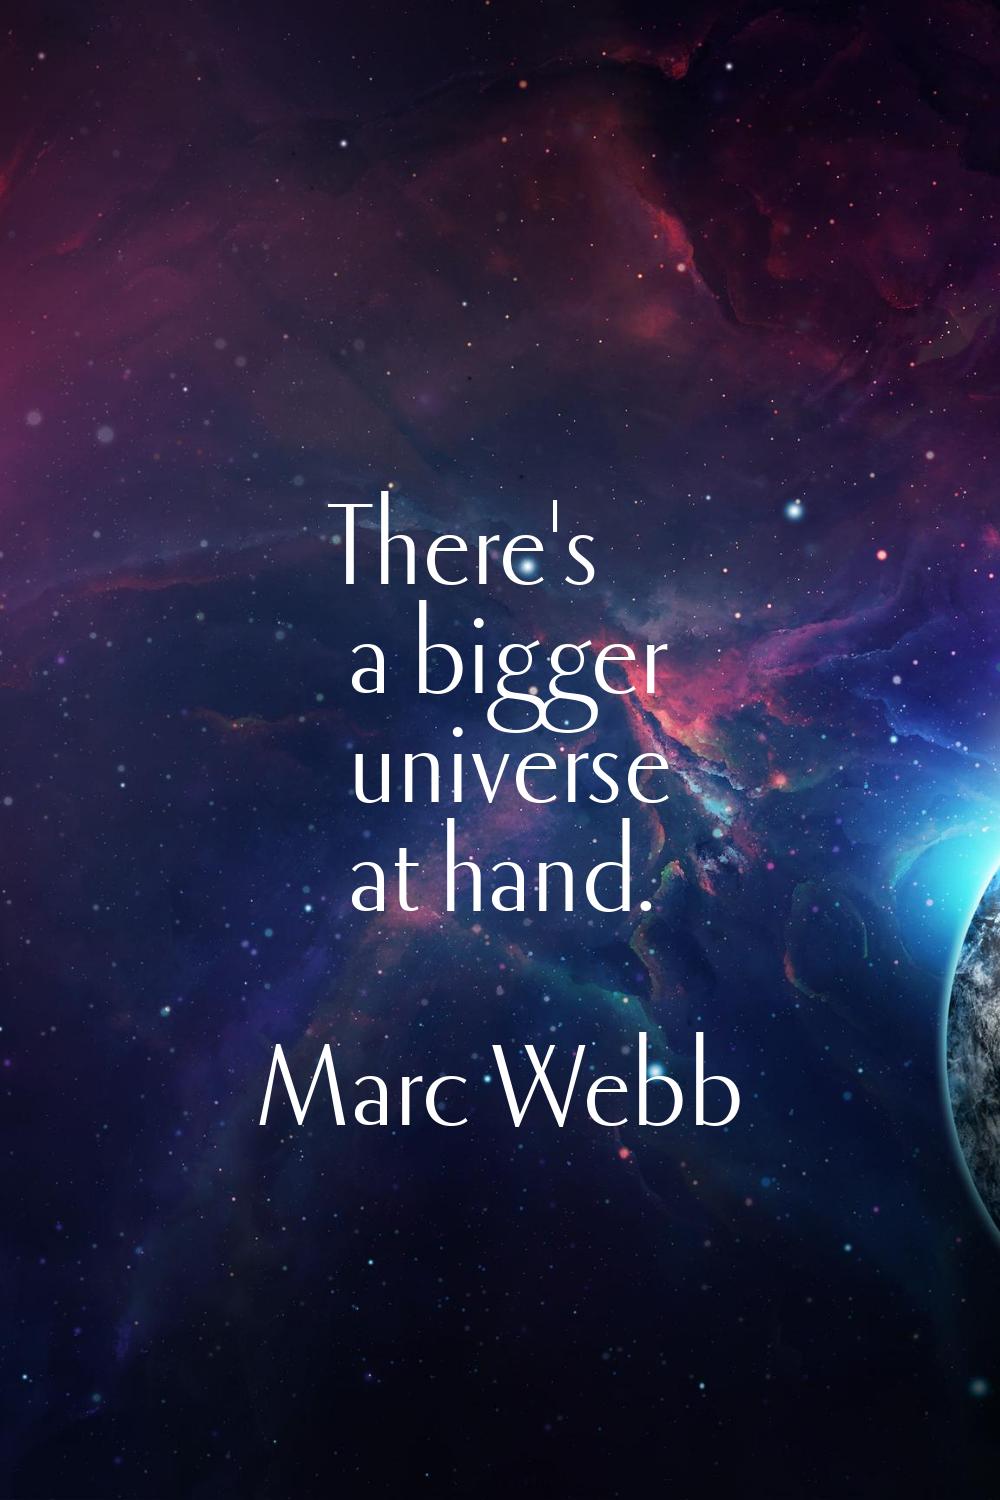 There's a bigger universe at hand.